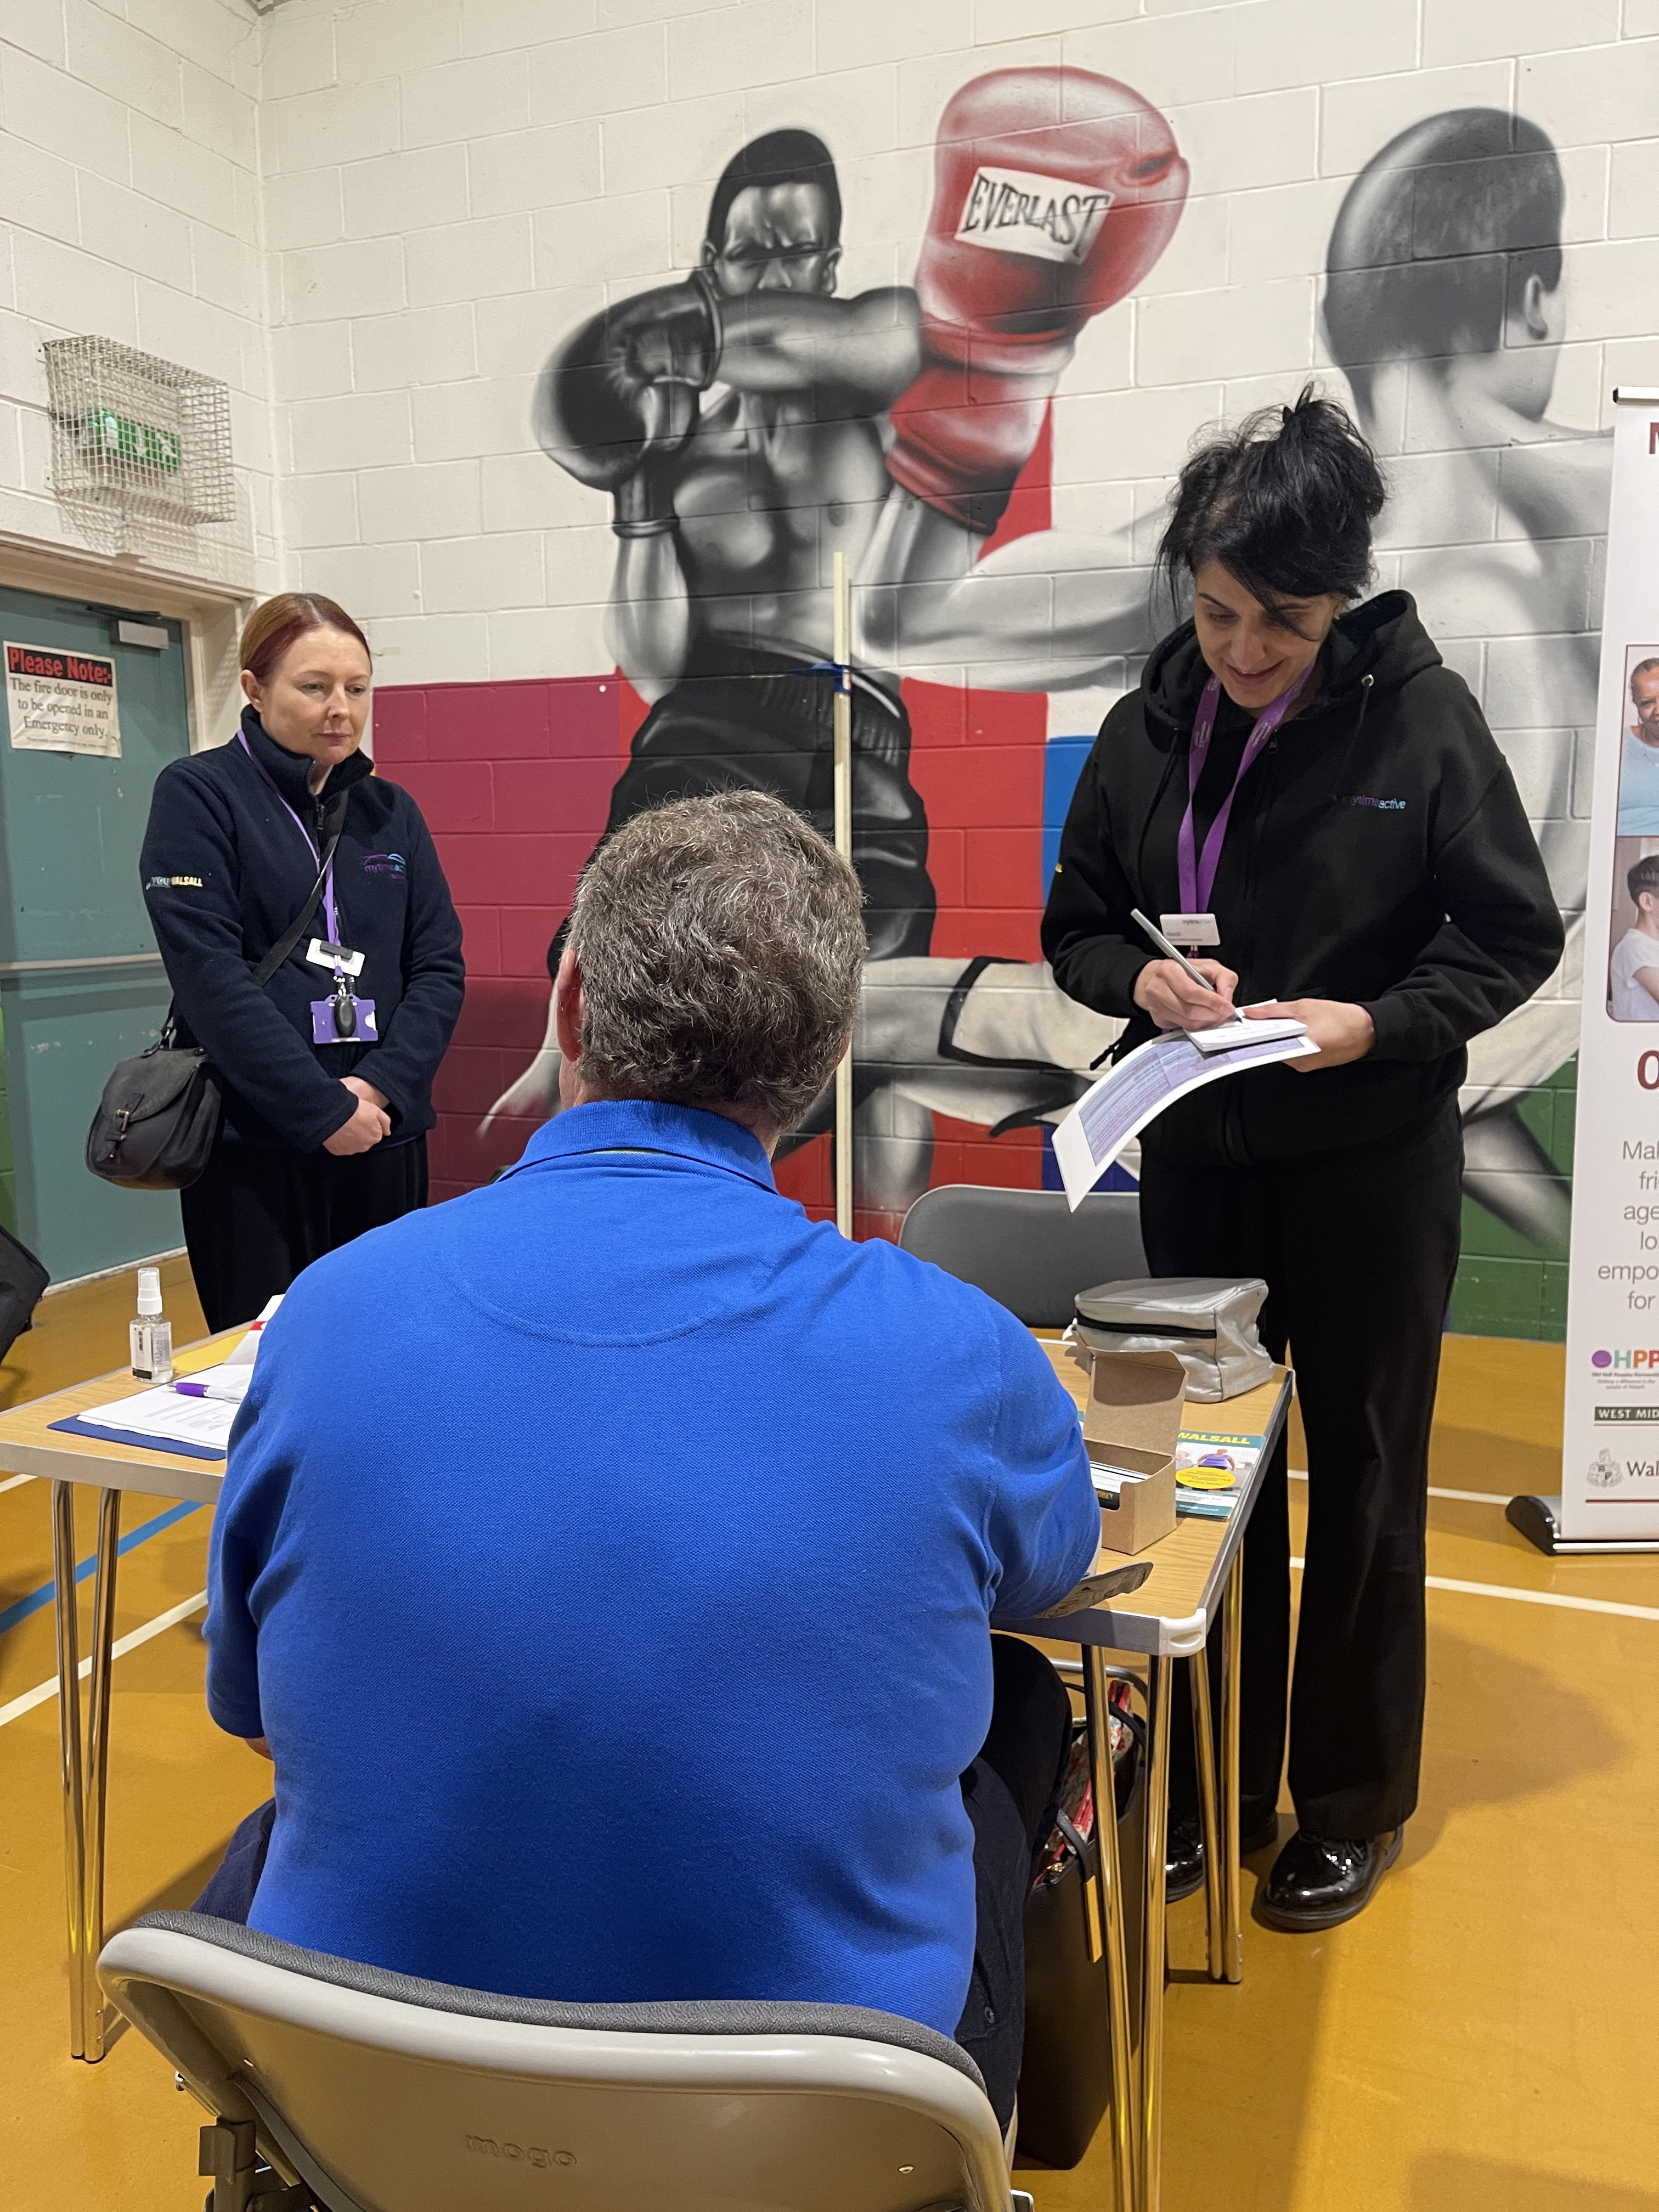 Image shows healthy lifestyle specialists undertaking a health assessment. 